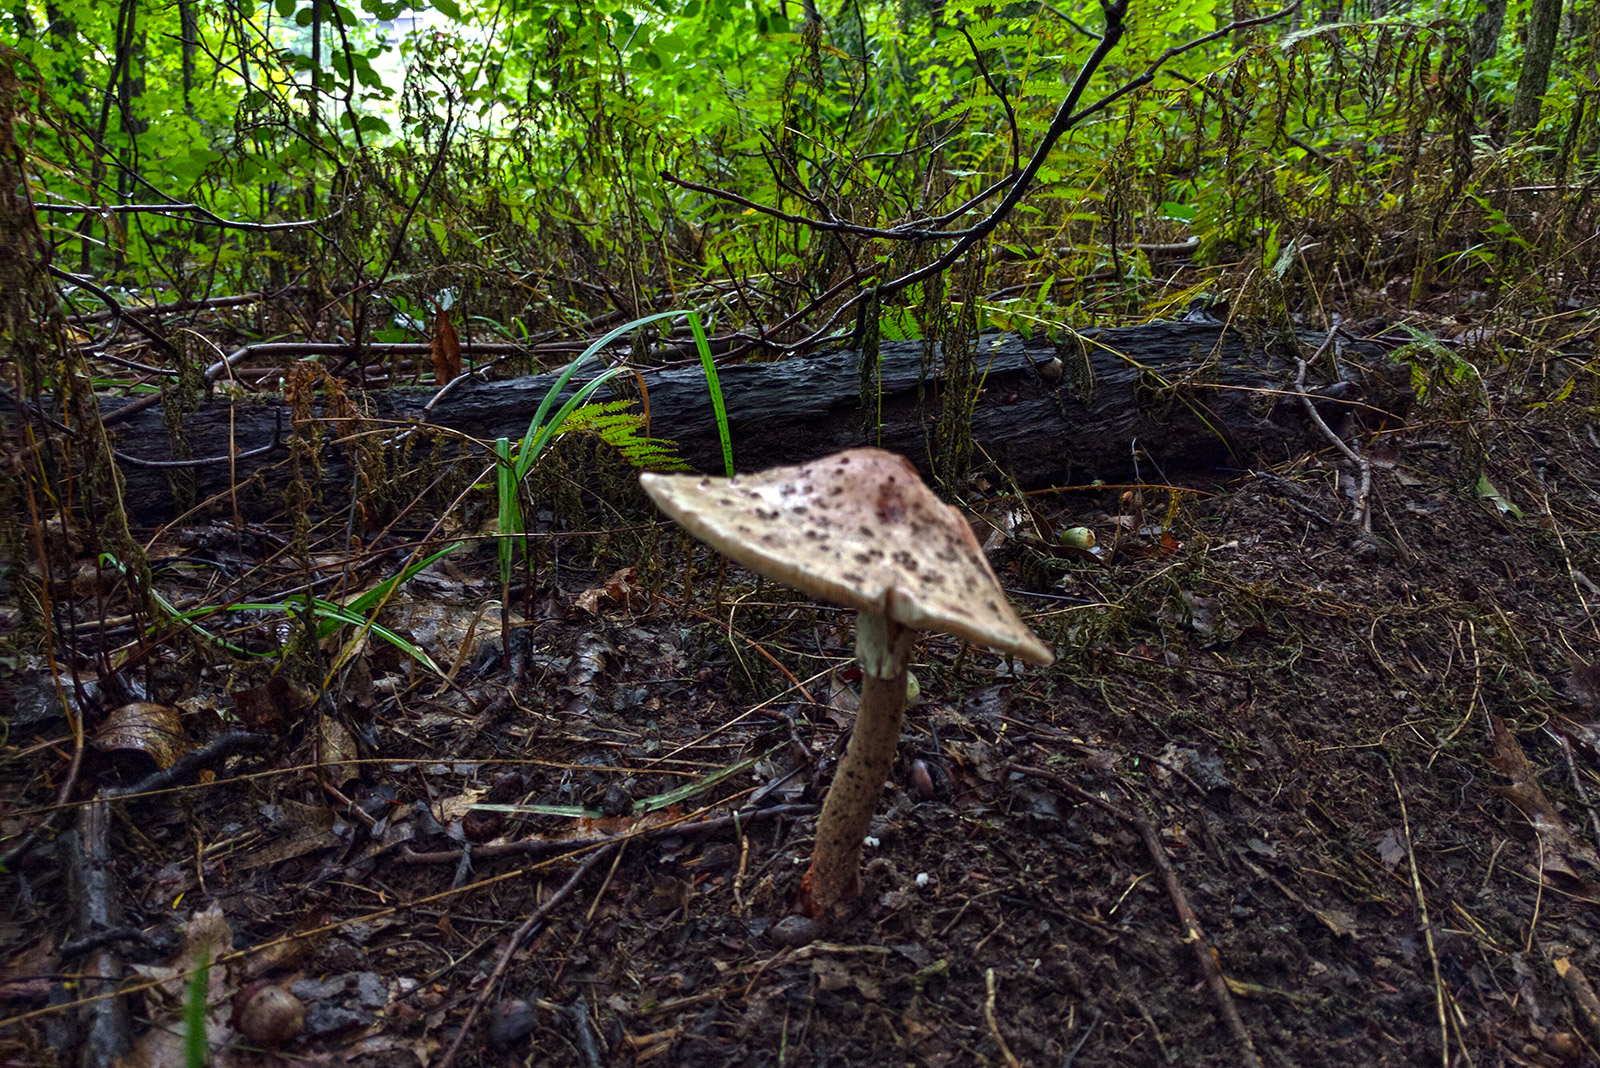 umbrella shaped mushroom growing out of the forest floor